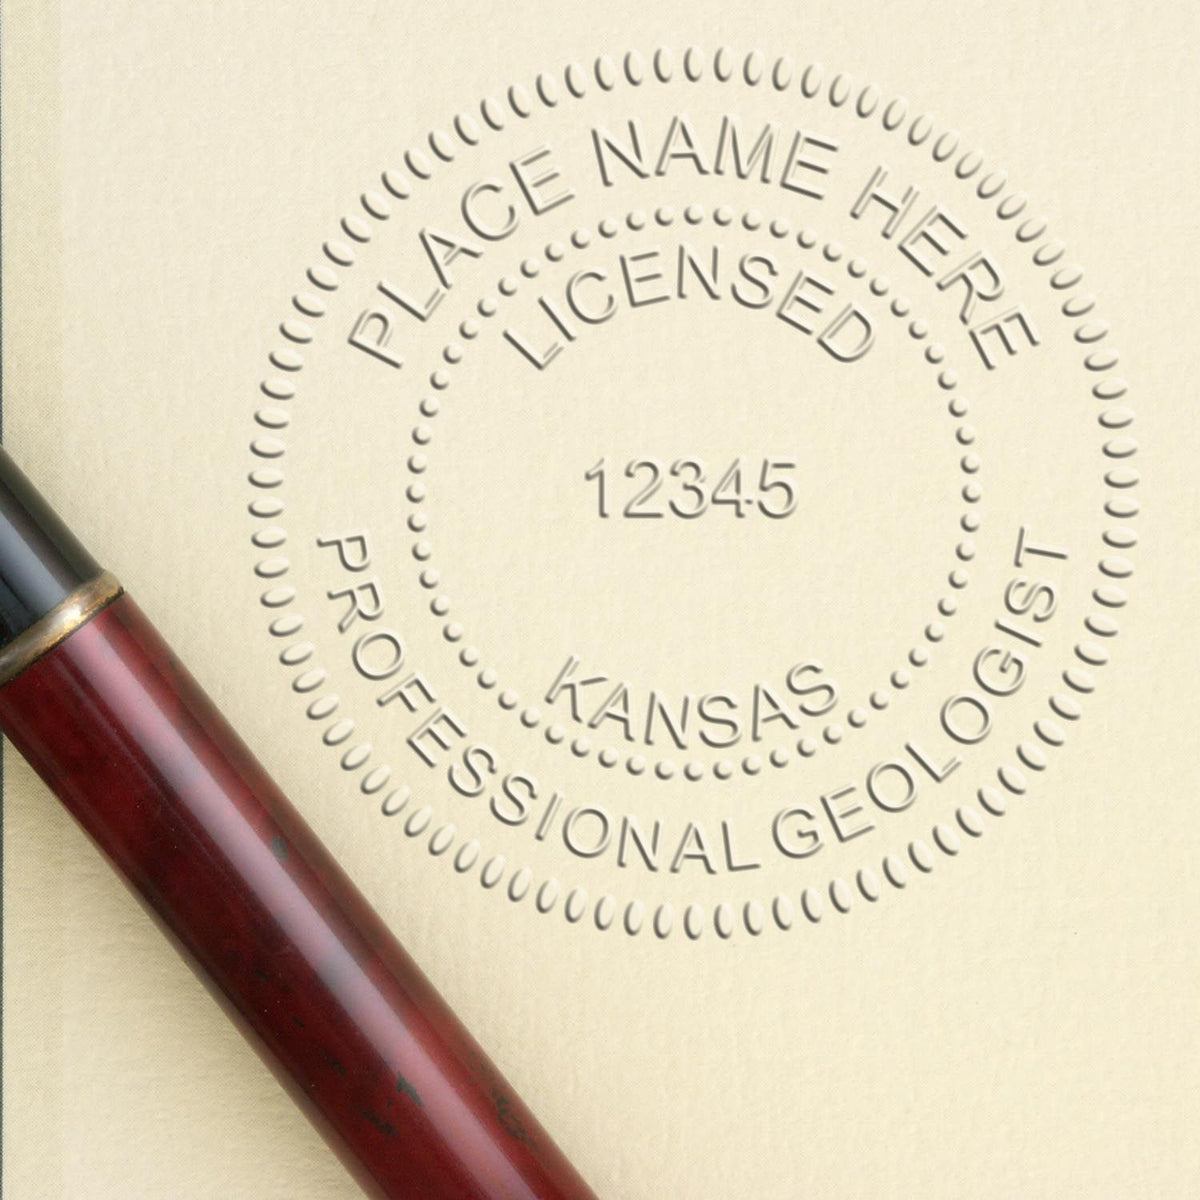 Another Example of a stamped impression of the Handheld Kansas Professional Geologist Embosser on a office form